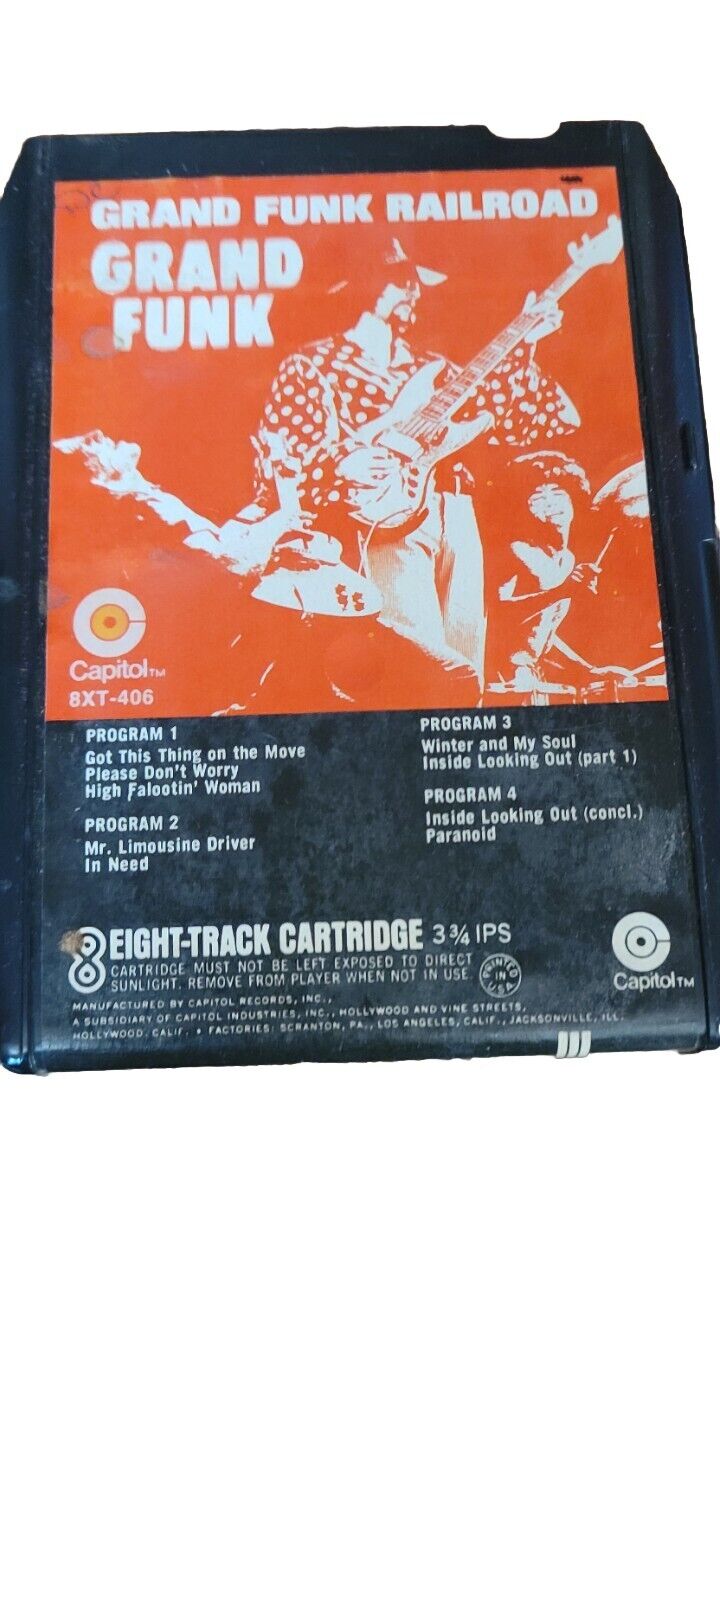 Vintage Grand Funk Railroad-Grand Funk Eight-Track Cartridge. Preowned/Untested